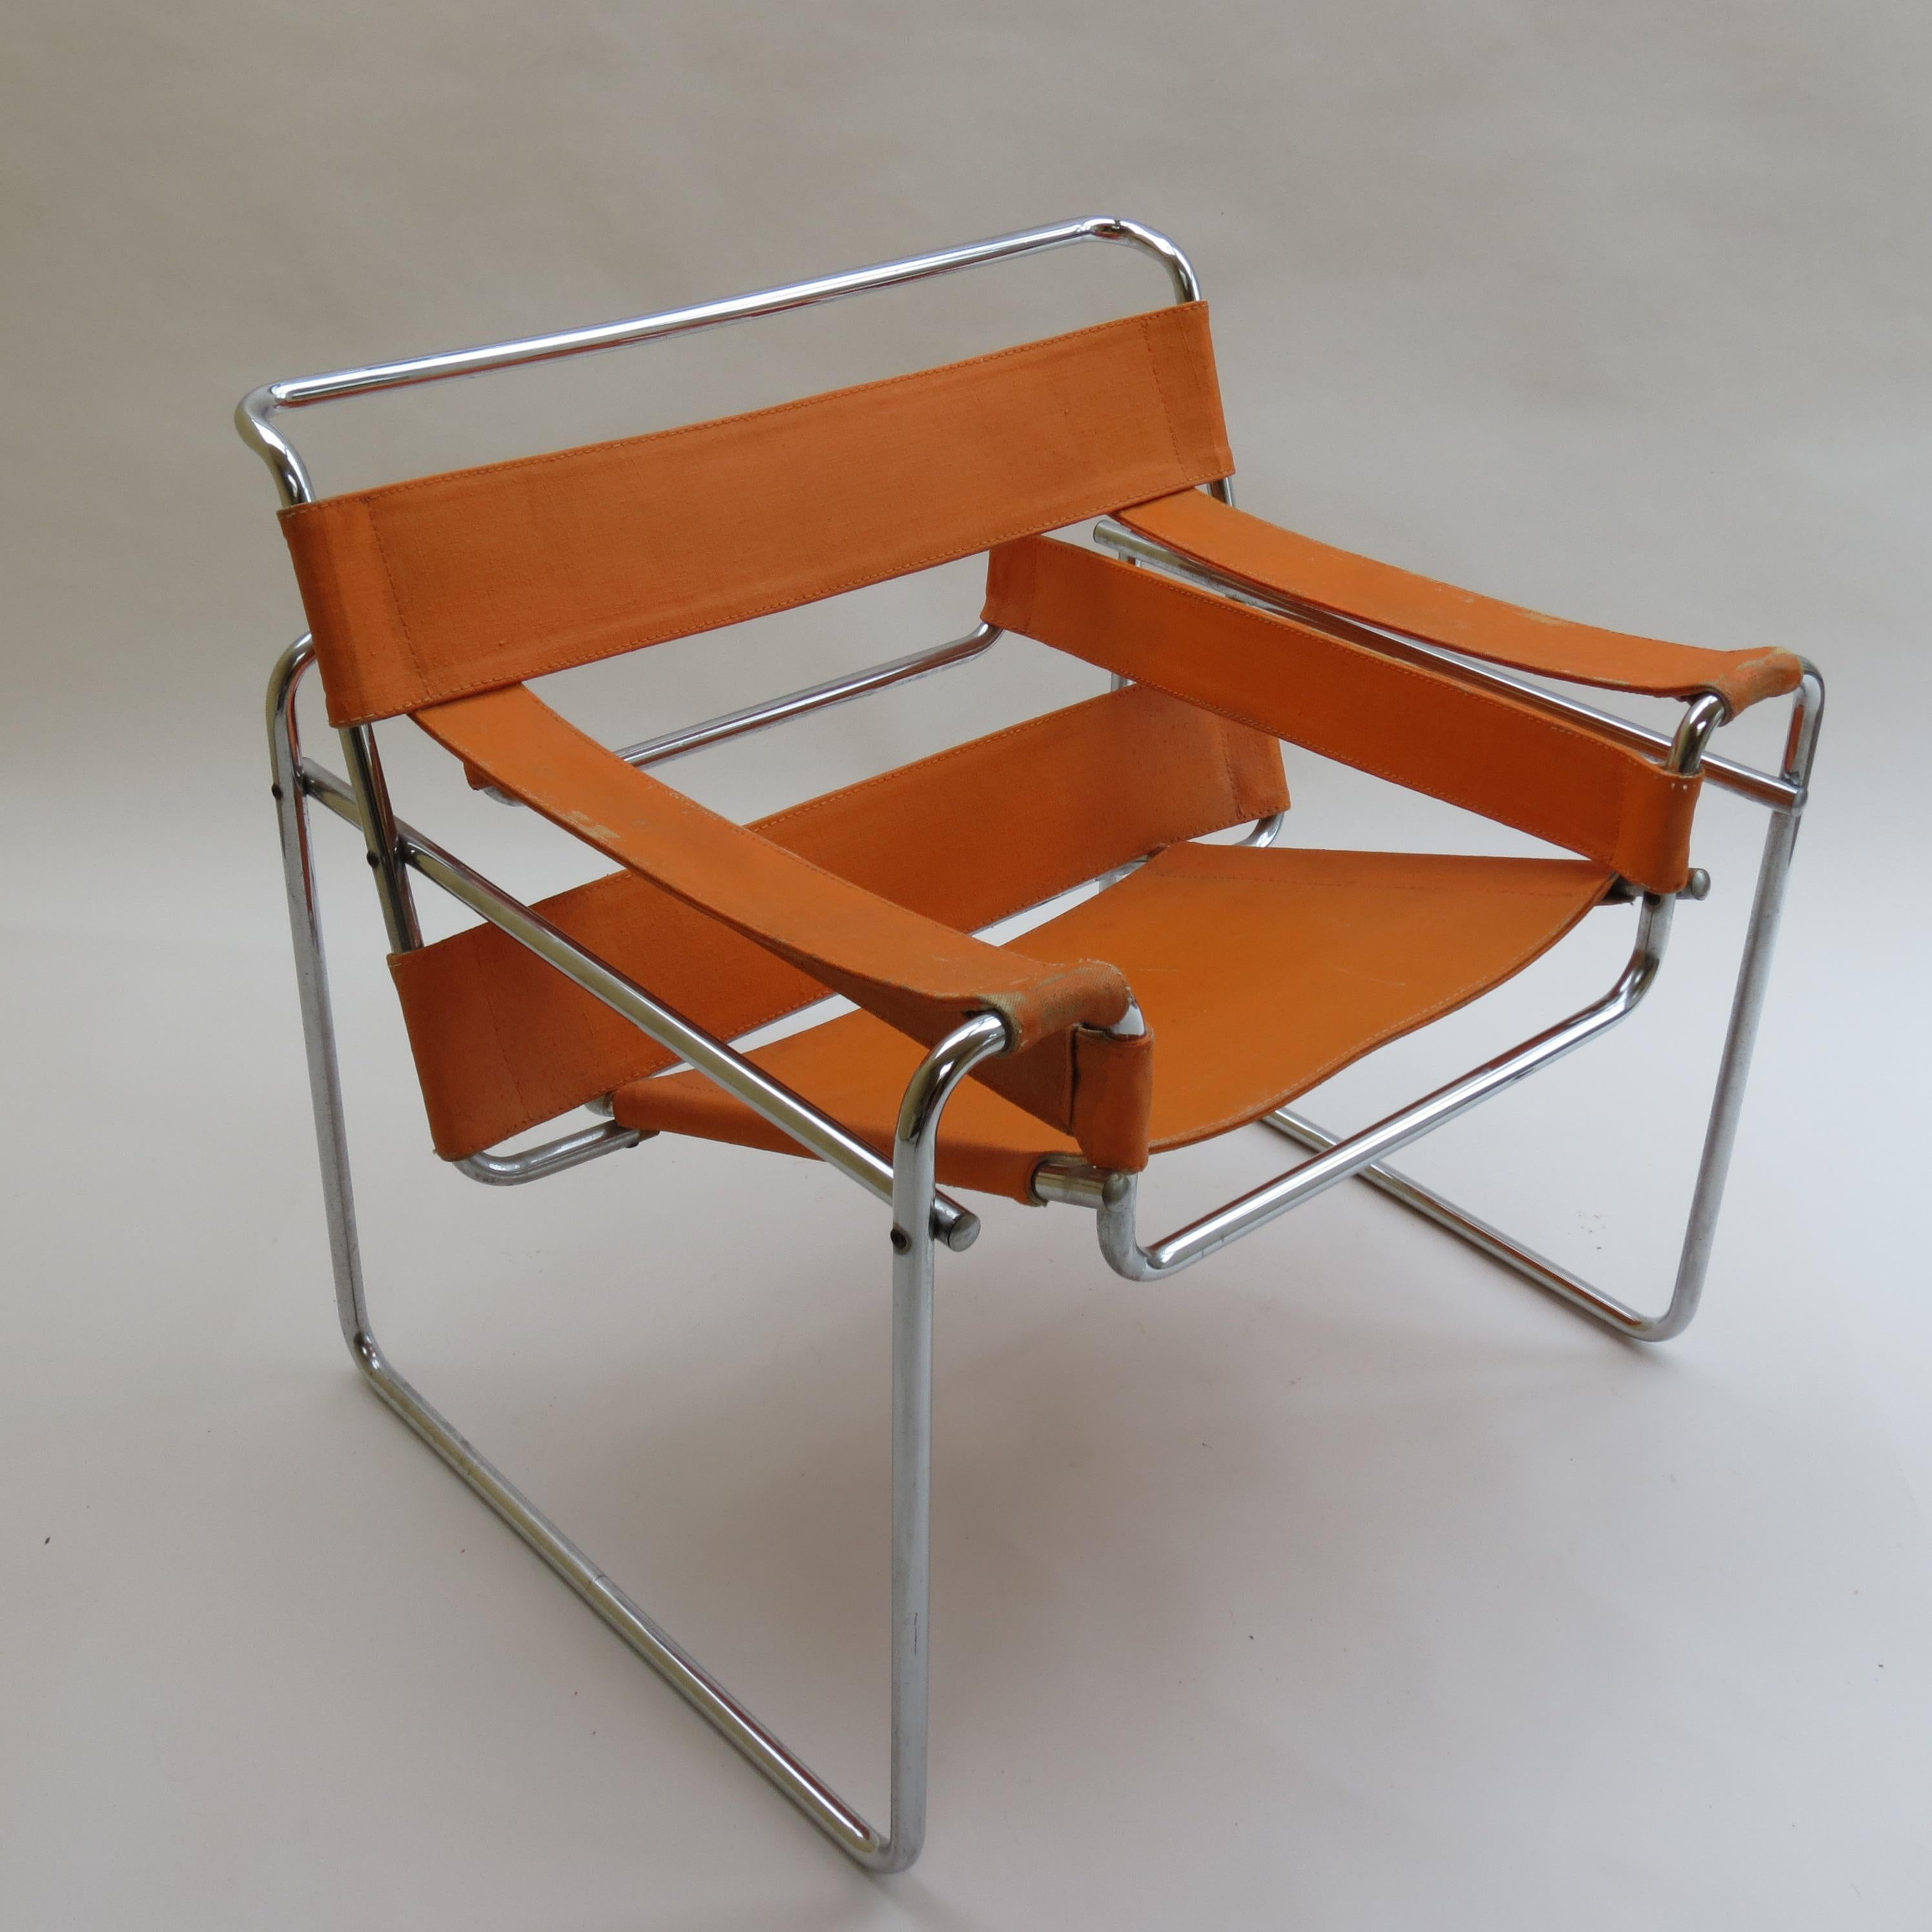 Wassily armchair, designed by Marcel Breuer and manufactured by Gavina, Italy in the 1960s, original year of design 1925. Gavina produced the Wassily chair under licence between 1962 and 1968, then Knoll purchased the Gavina company and took over